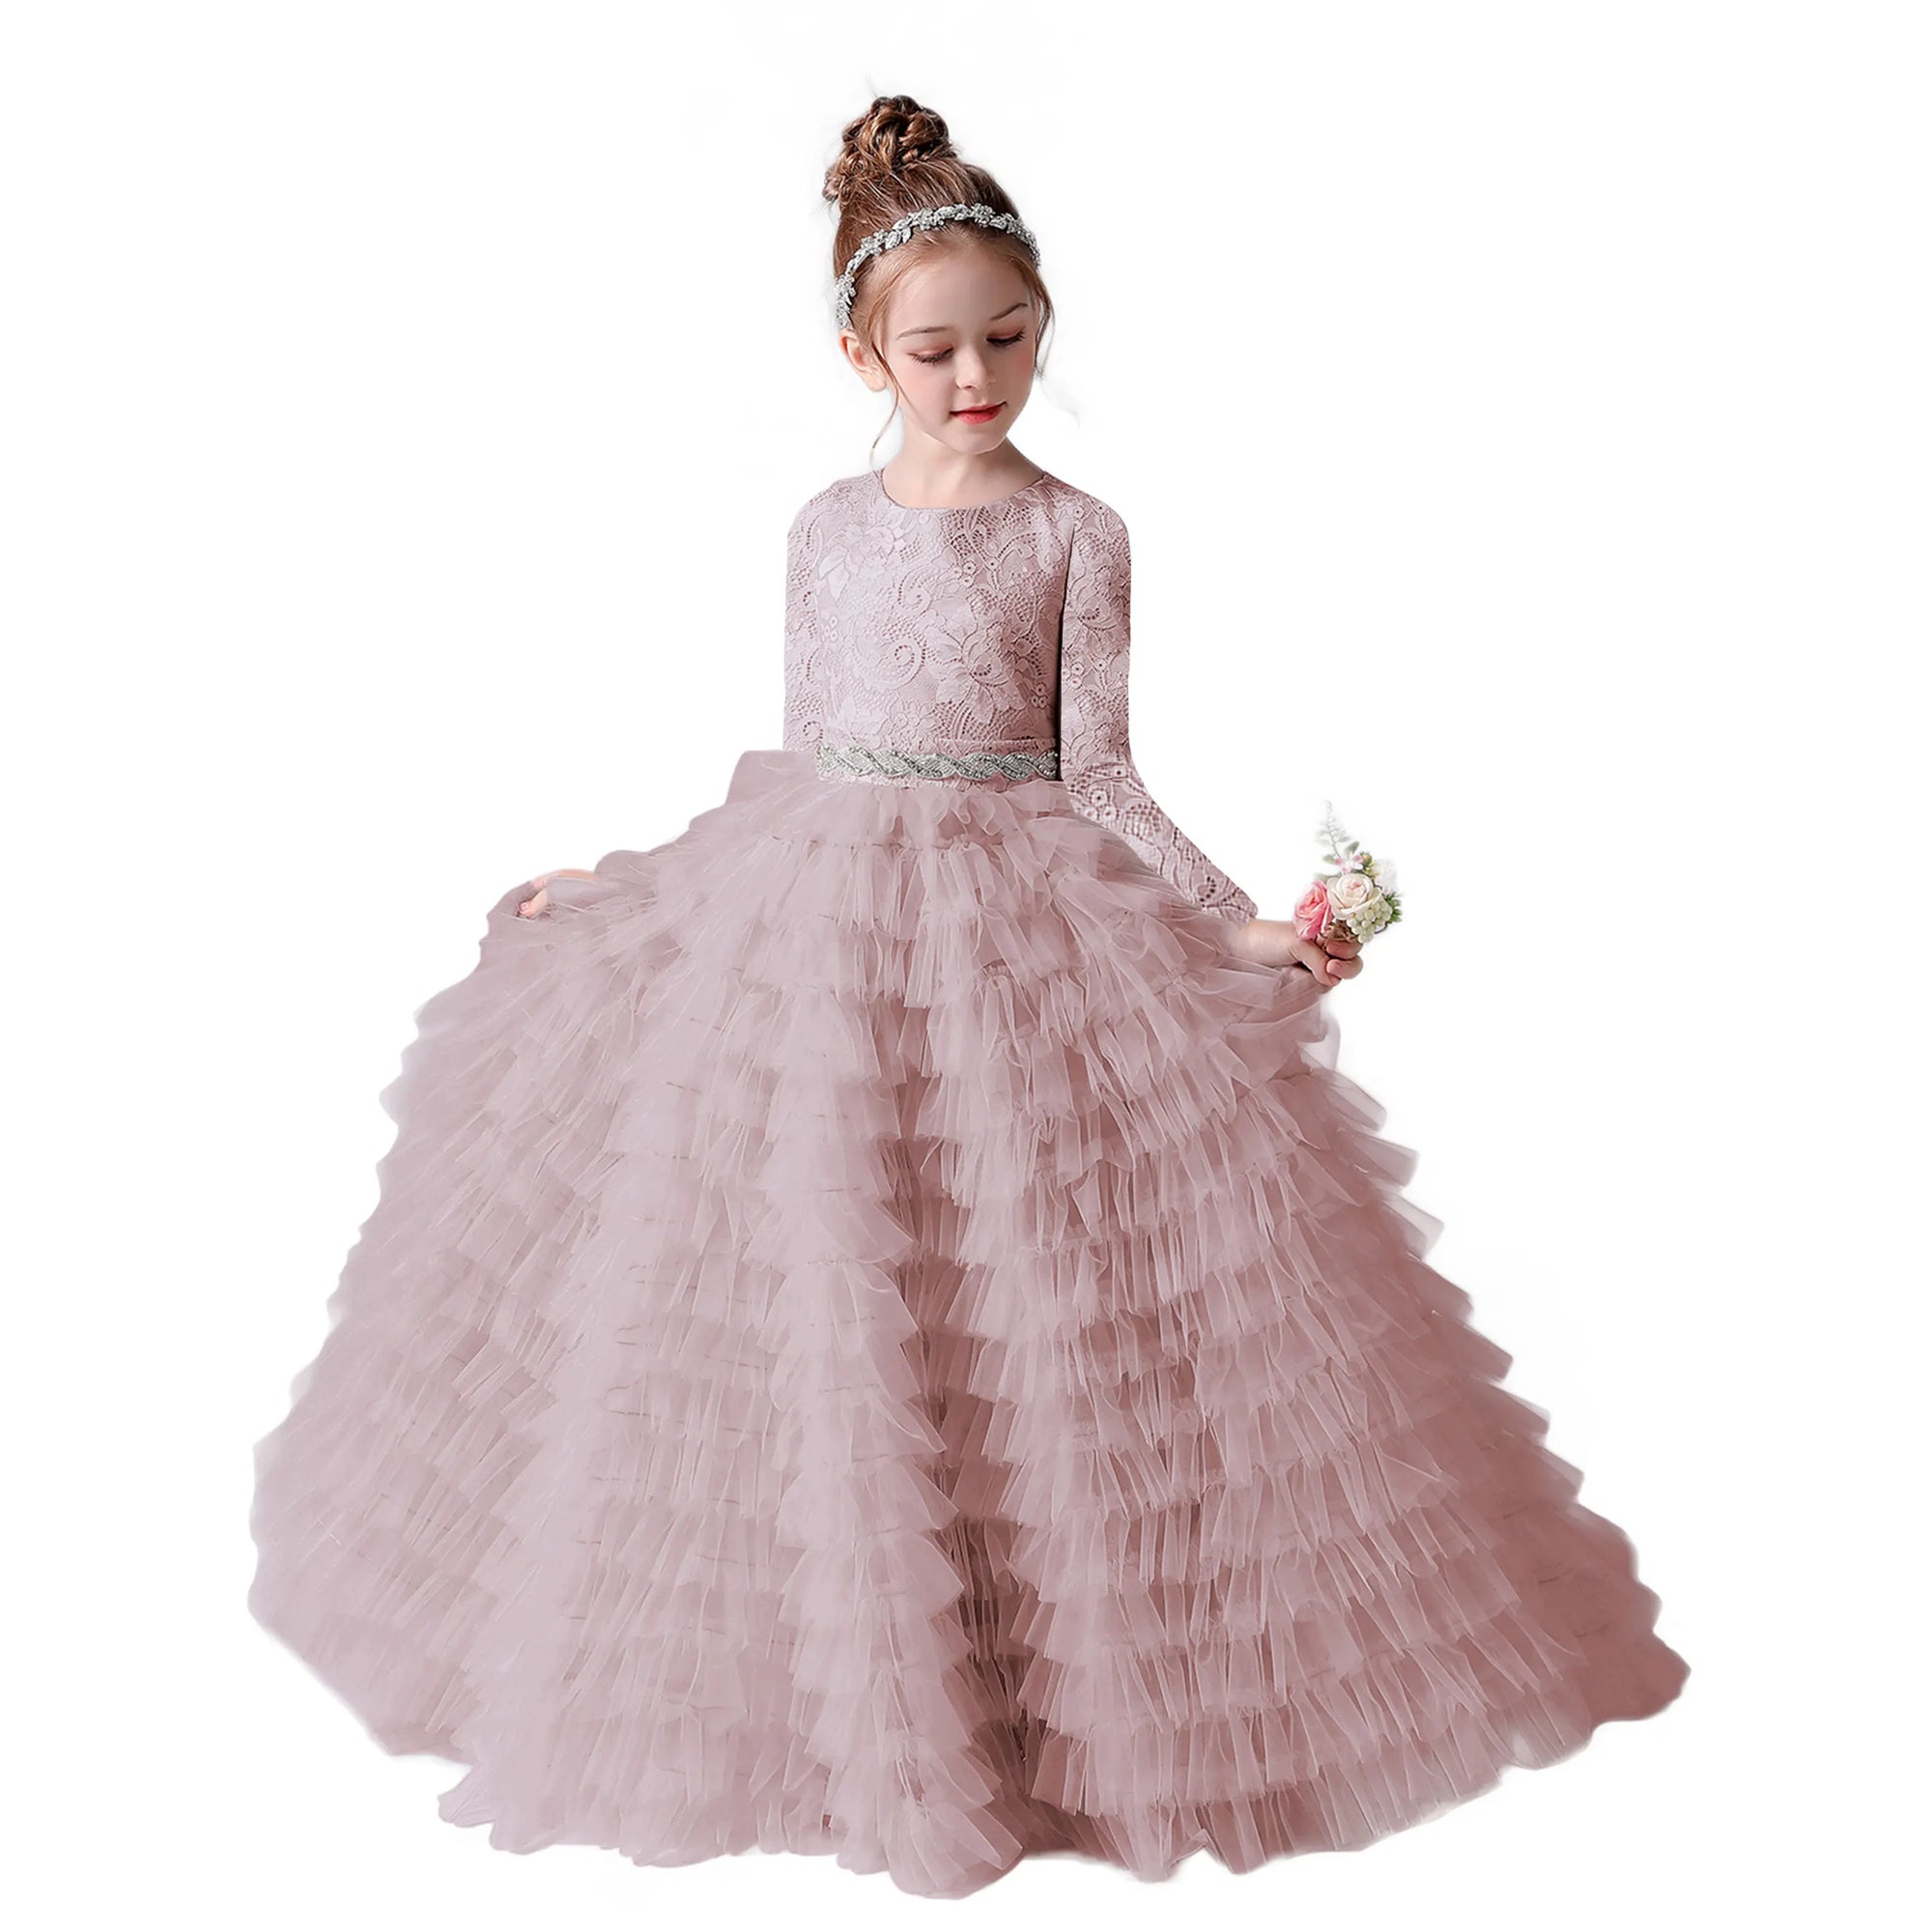 Long Sleeves Tulle Princess Dress For Girls Party Wear Girl Gown